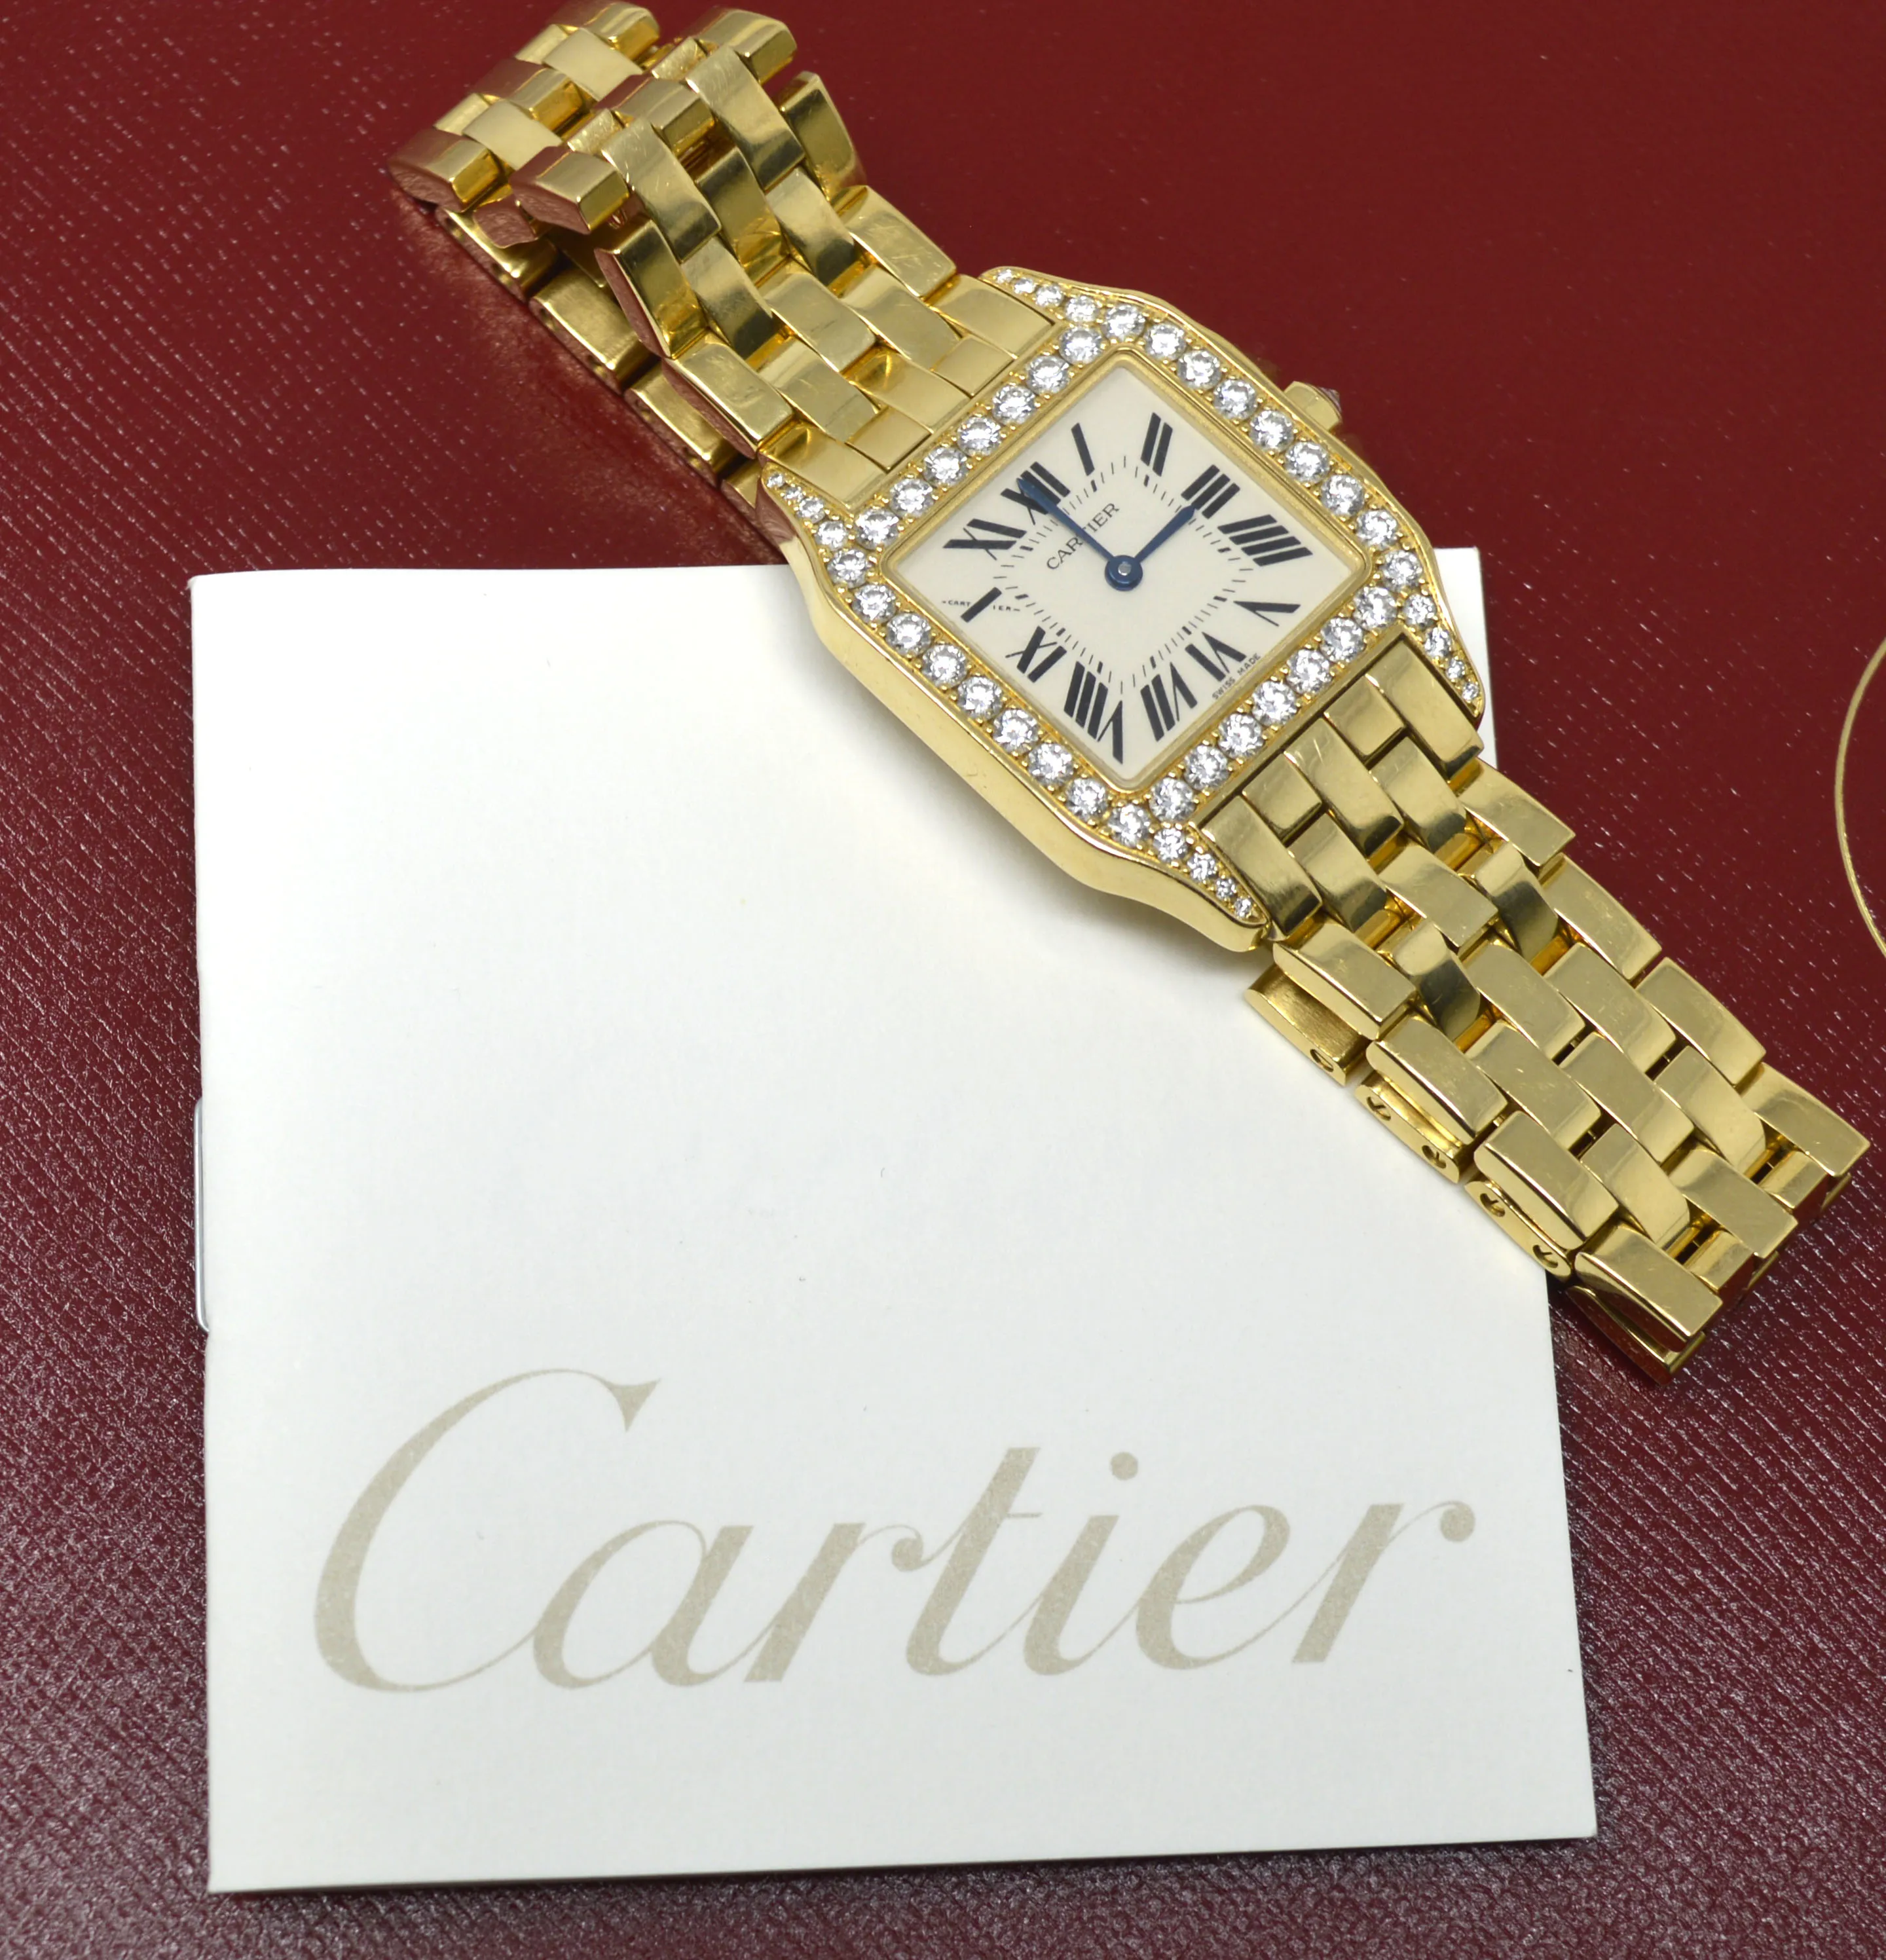 Cartier Santos Demoiselle WF9002Y7 26mm Yellow gold and diamond-set Ivory